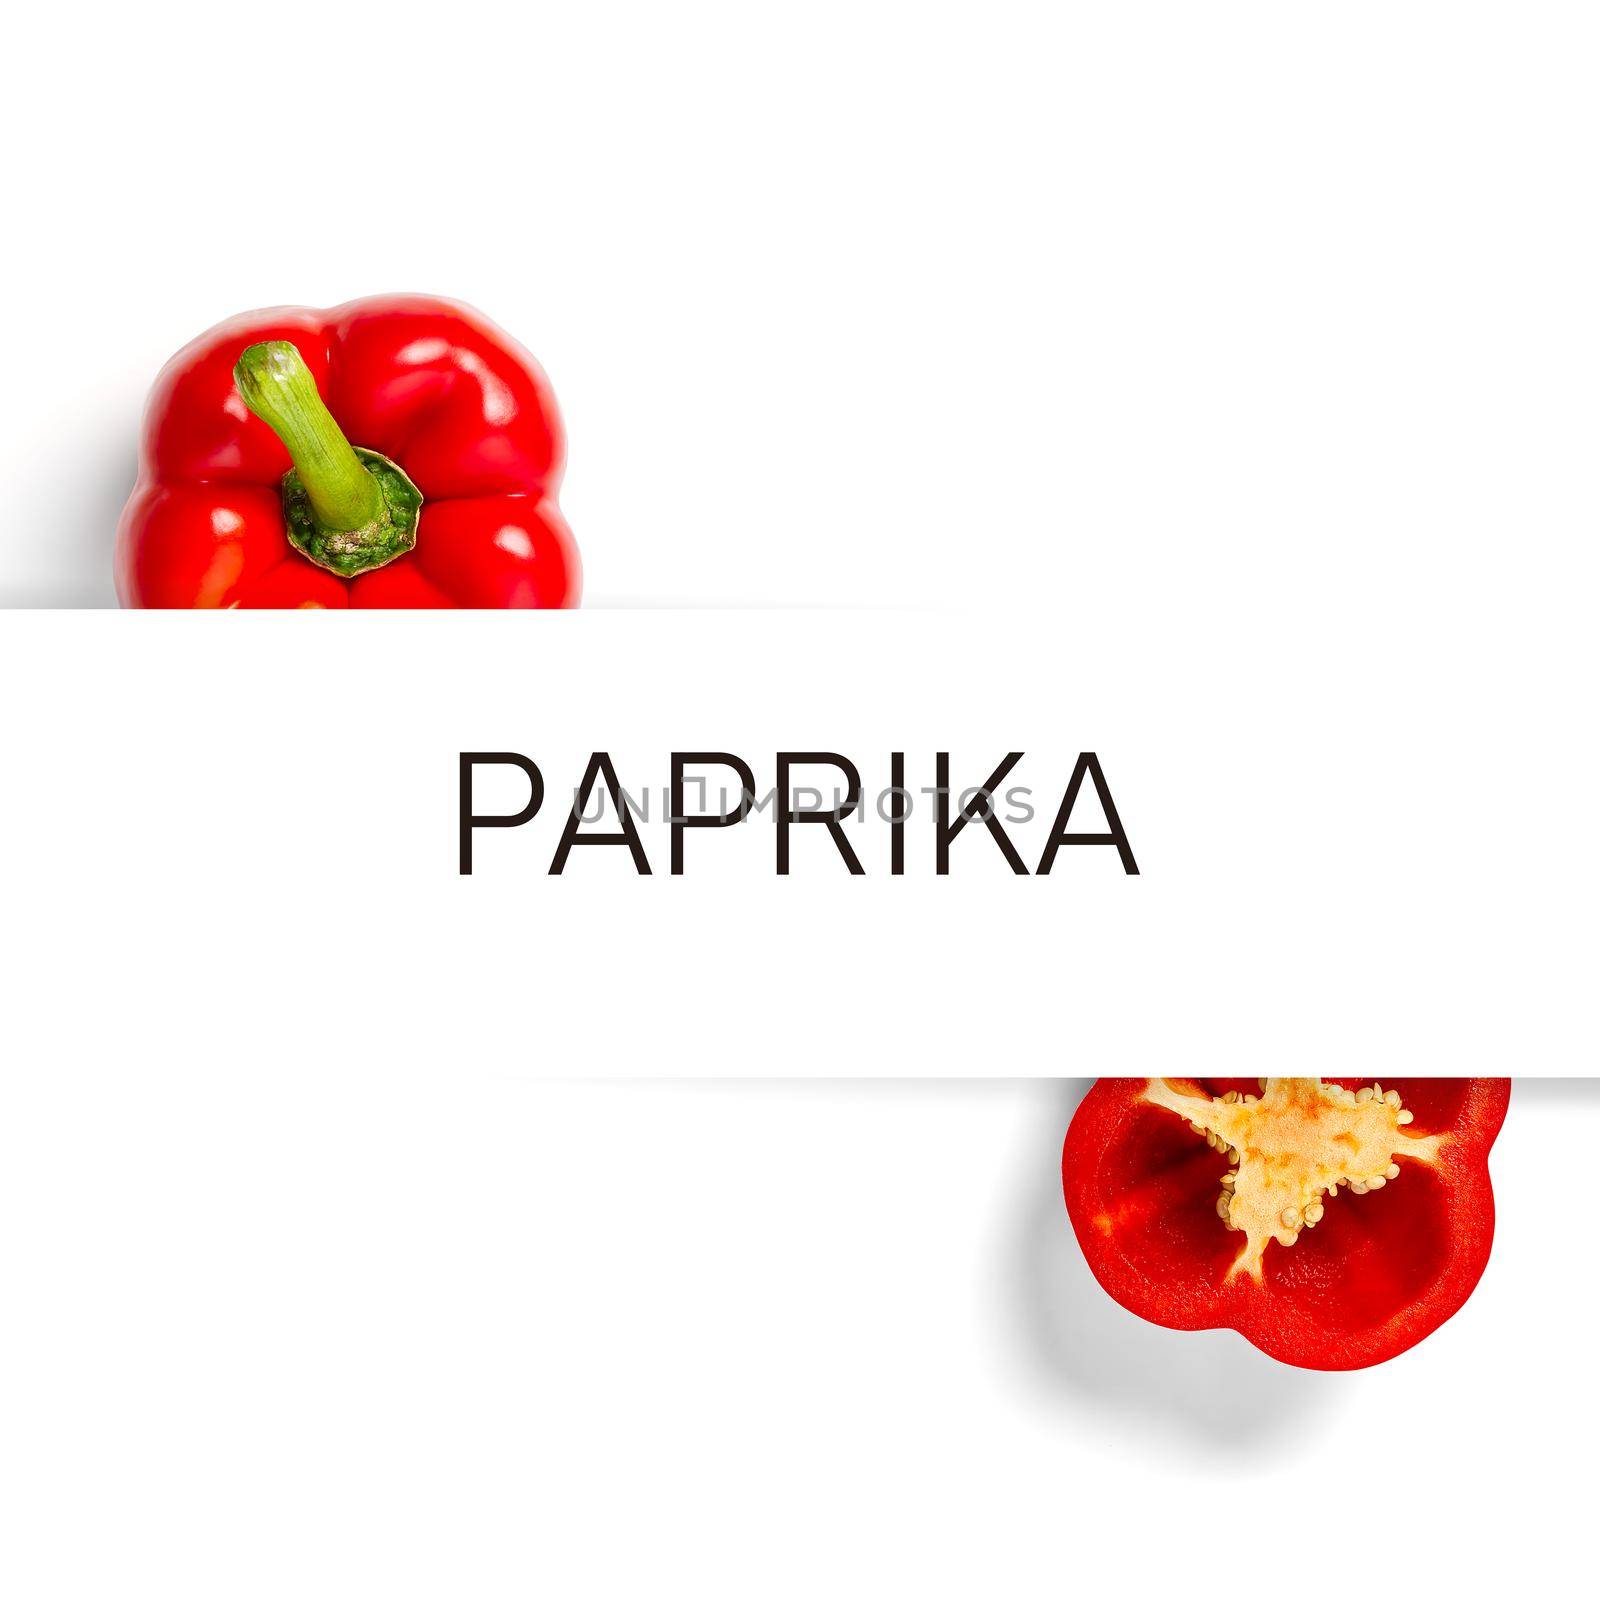 Paprika creative layout and composition isolated on white background. Food, healthy eating and dieting concept.